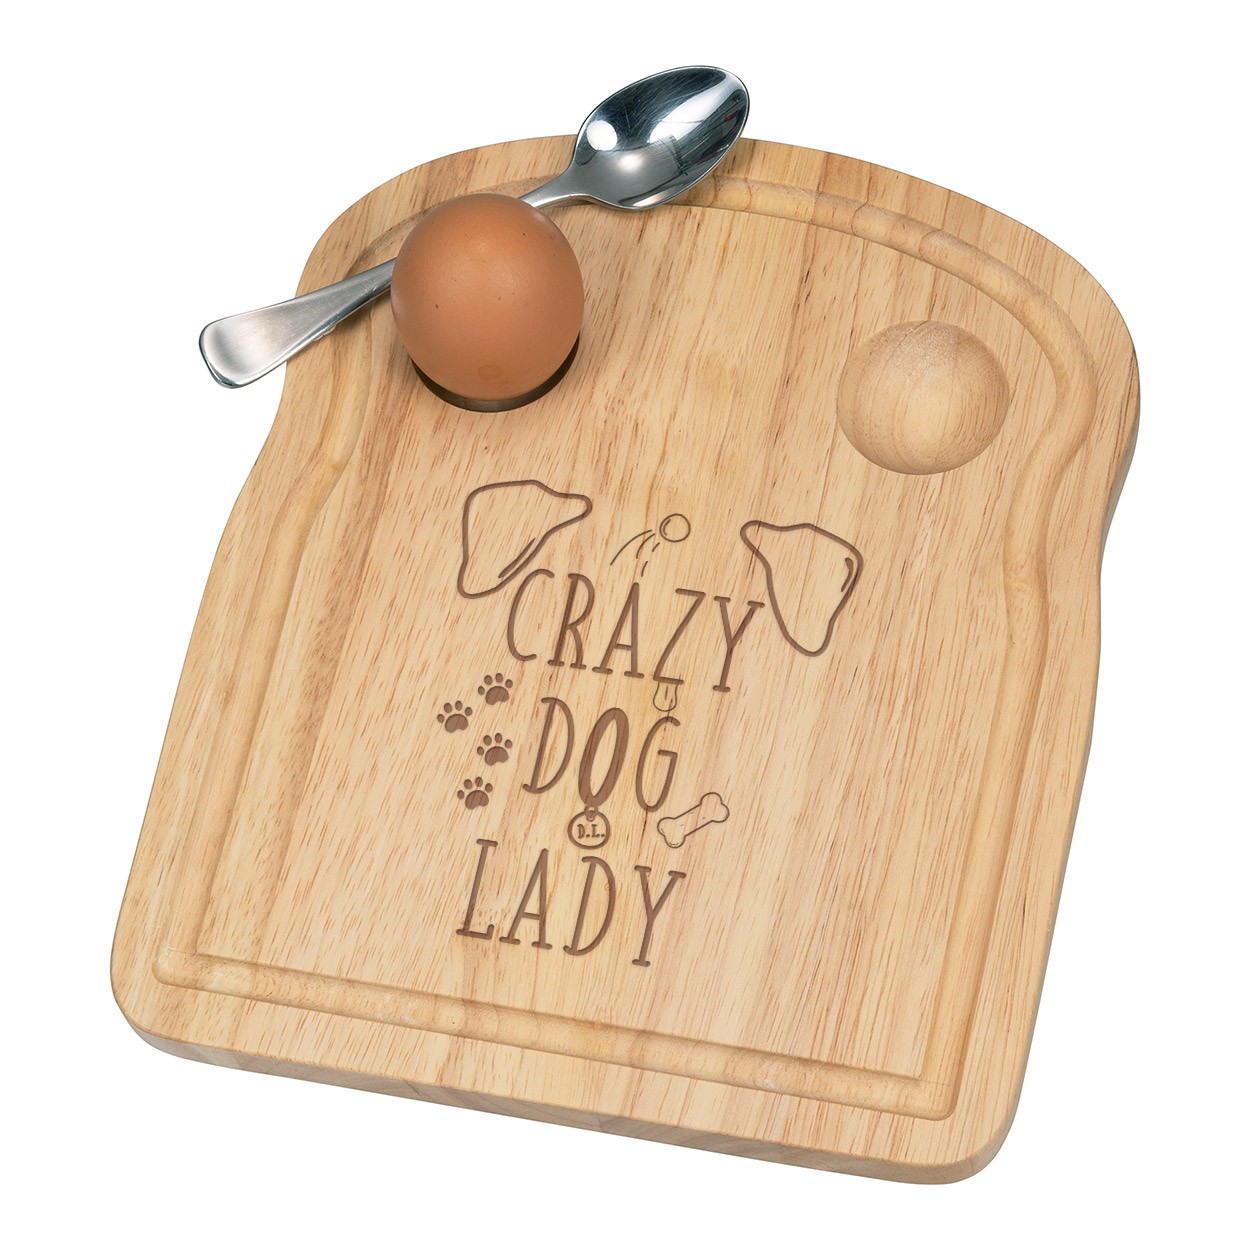 Crazy Dog Lady Brown Ears Breakfast Dippy Egg Cup Board Wooden